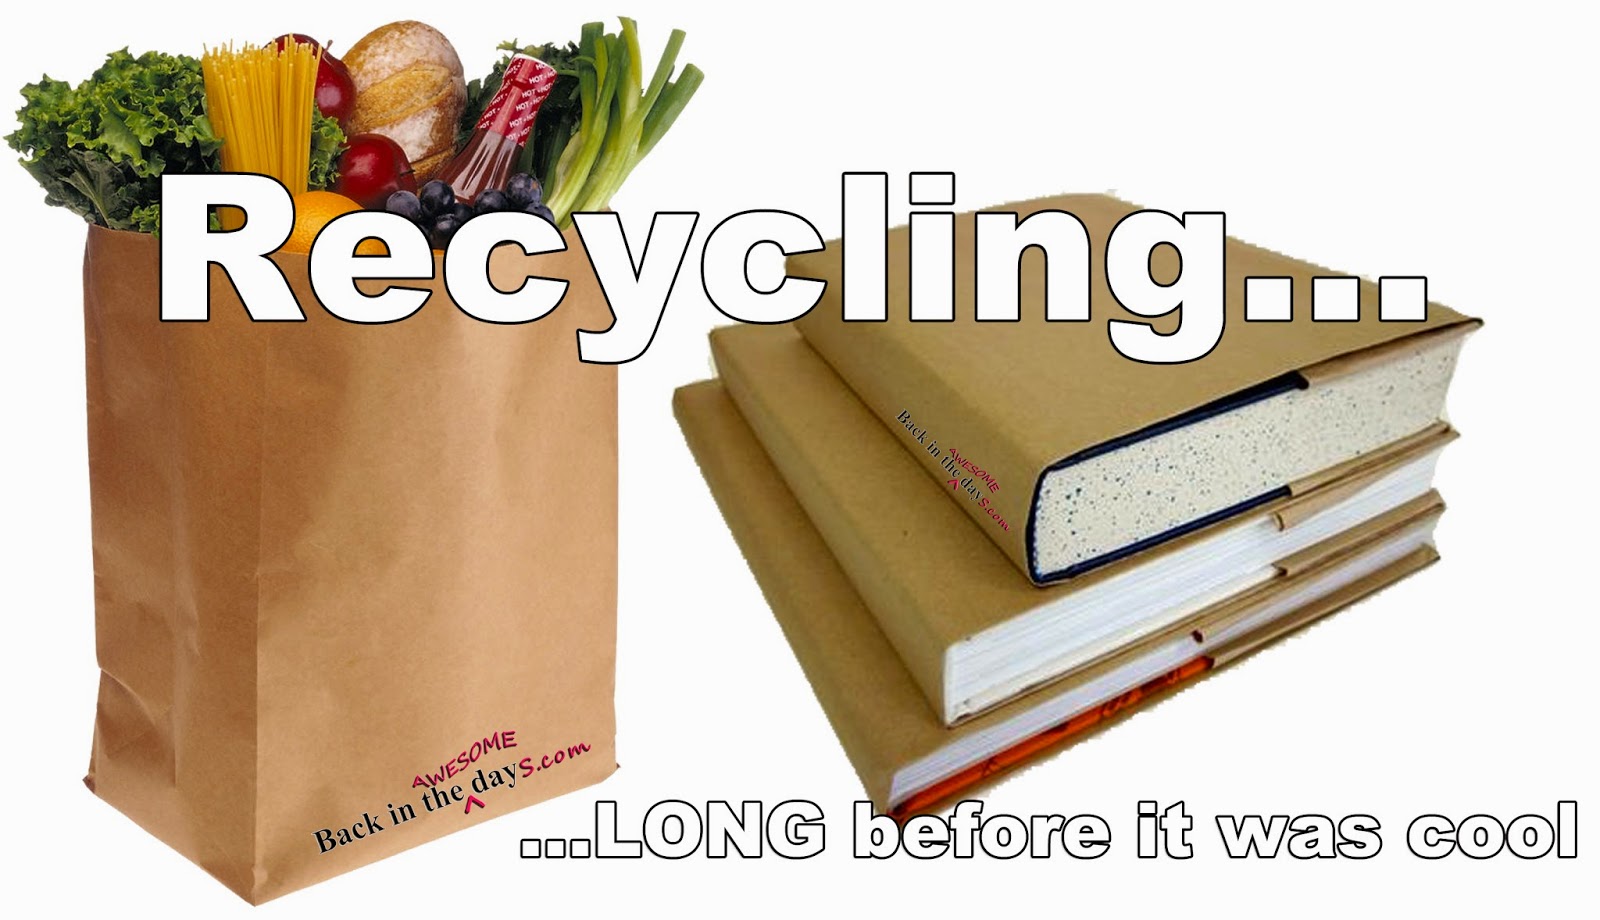 Grocery bag book covers